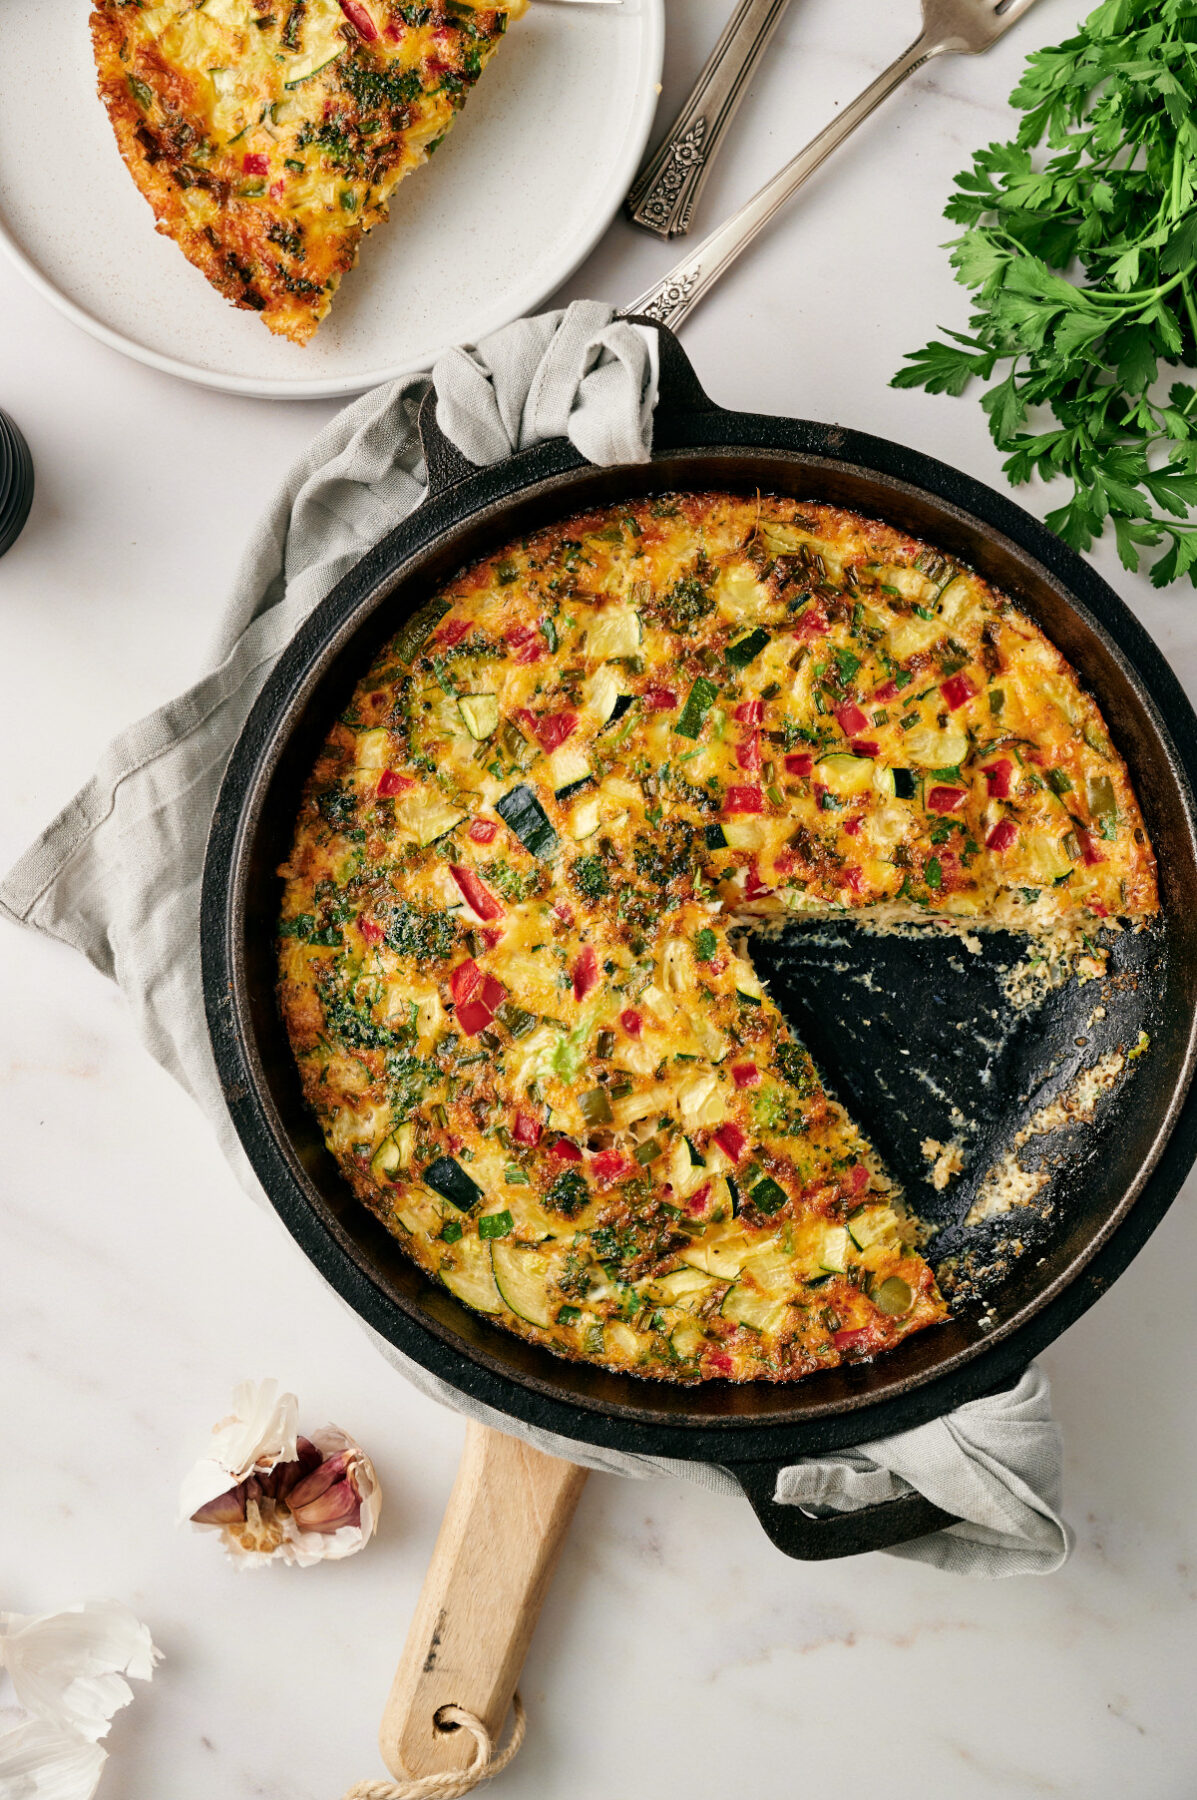 Vertical view of a fully cooked vegetable frittata in a cast iron skillet with one slice removed on a marble countertop with fresh herbs.